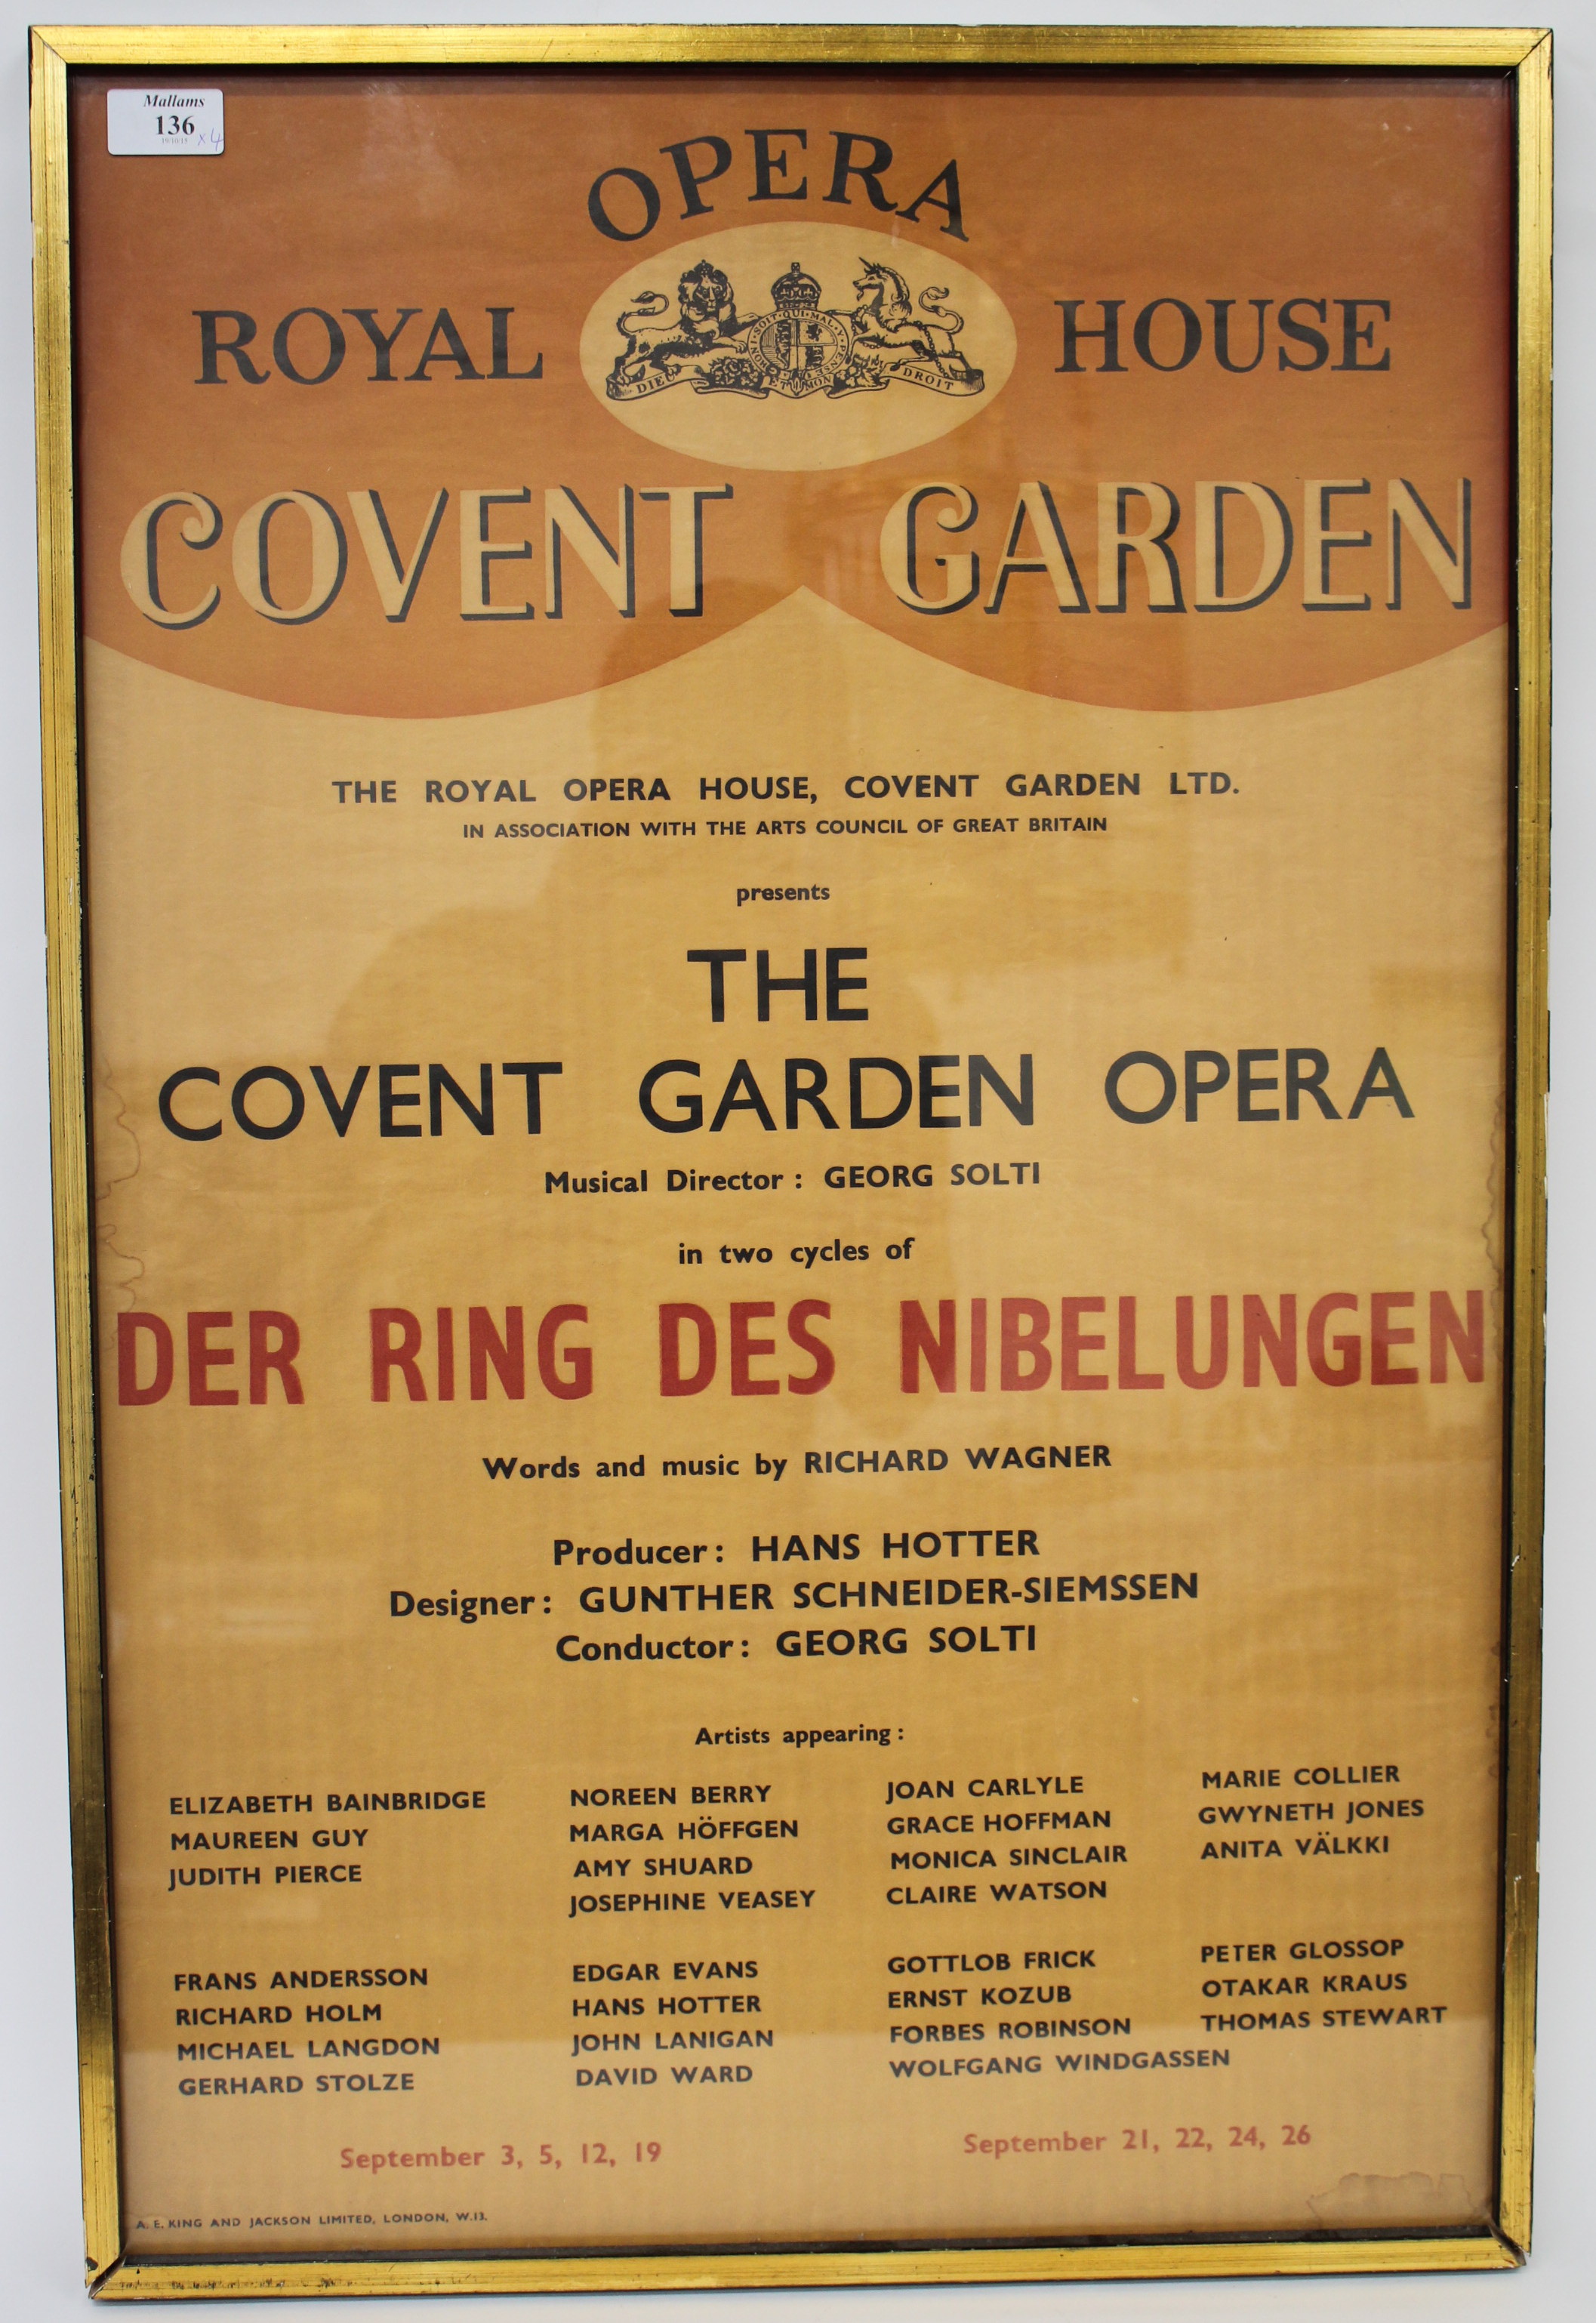 A LATE 1950'S / EARLY 1960'S ROYAL OPERA HOUSE COVENT GARDEN ADVERTISING POSTER for The Covent